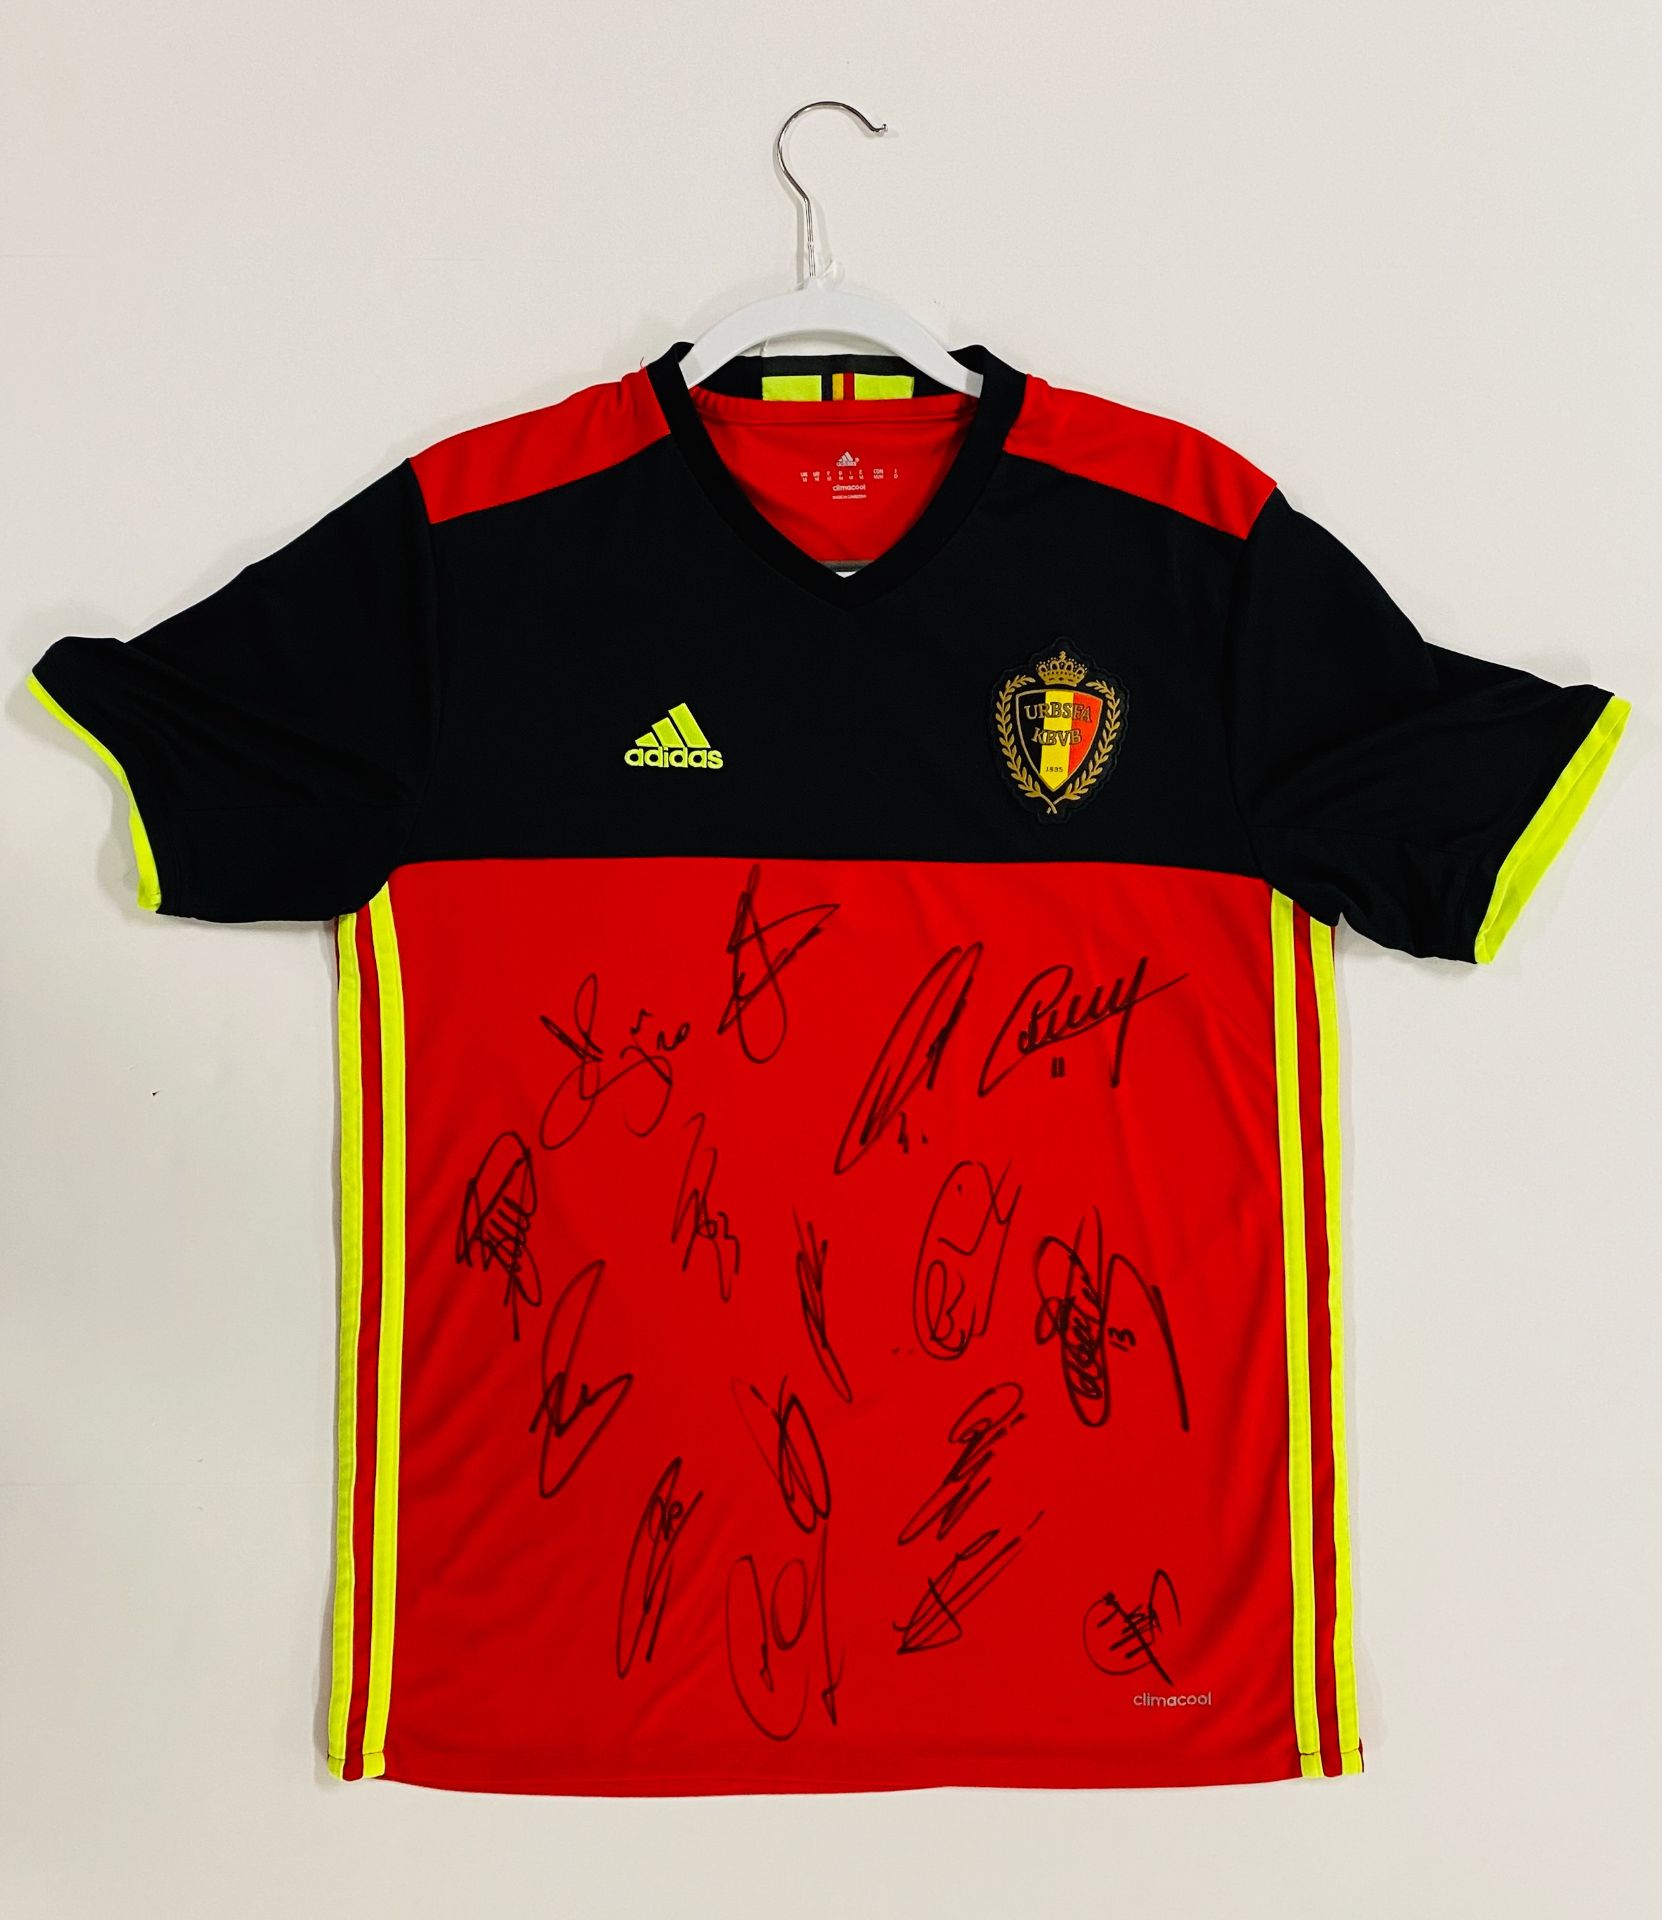 Belgium 2018 World Cup signed jersey - Image 2 of 3